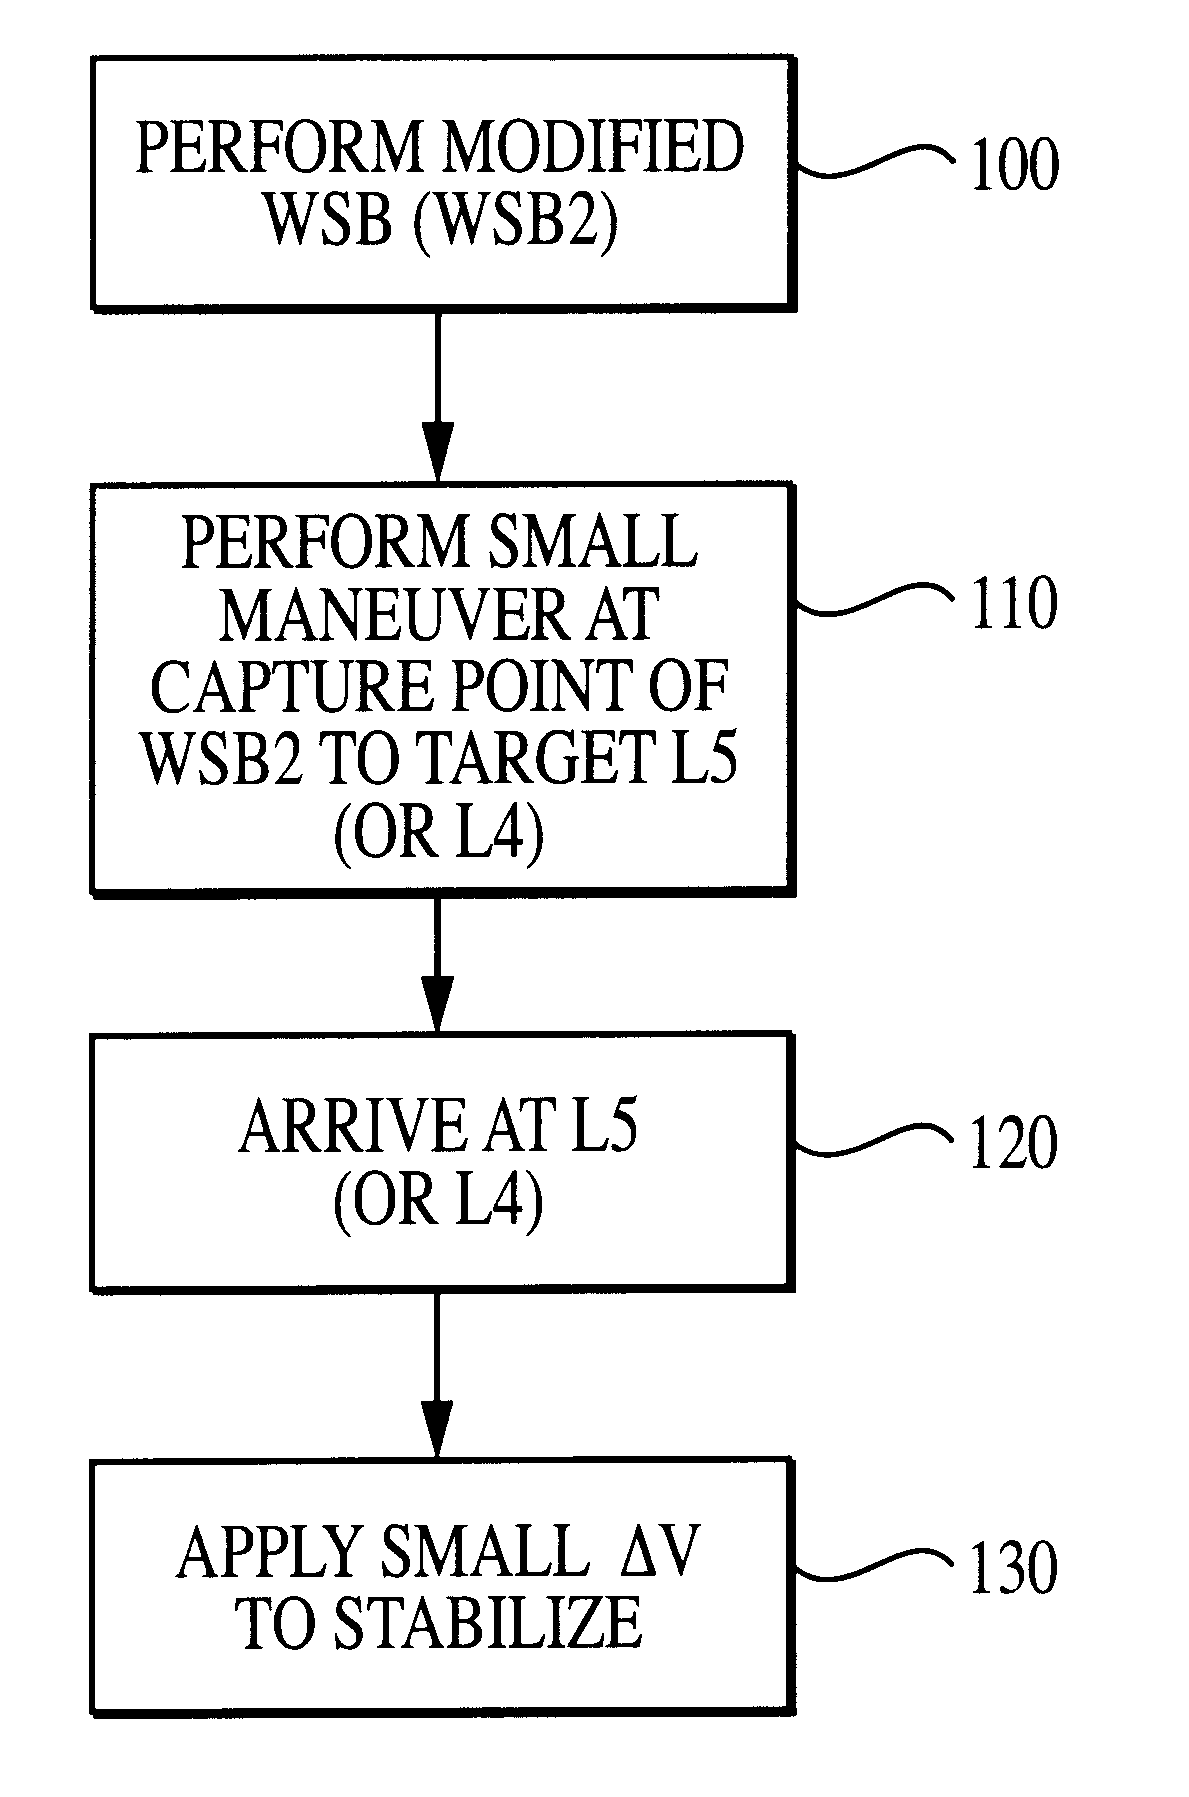 System and method of a ballistic capture transfer to L4, L5